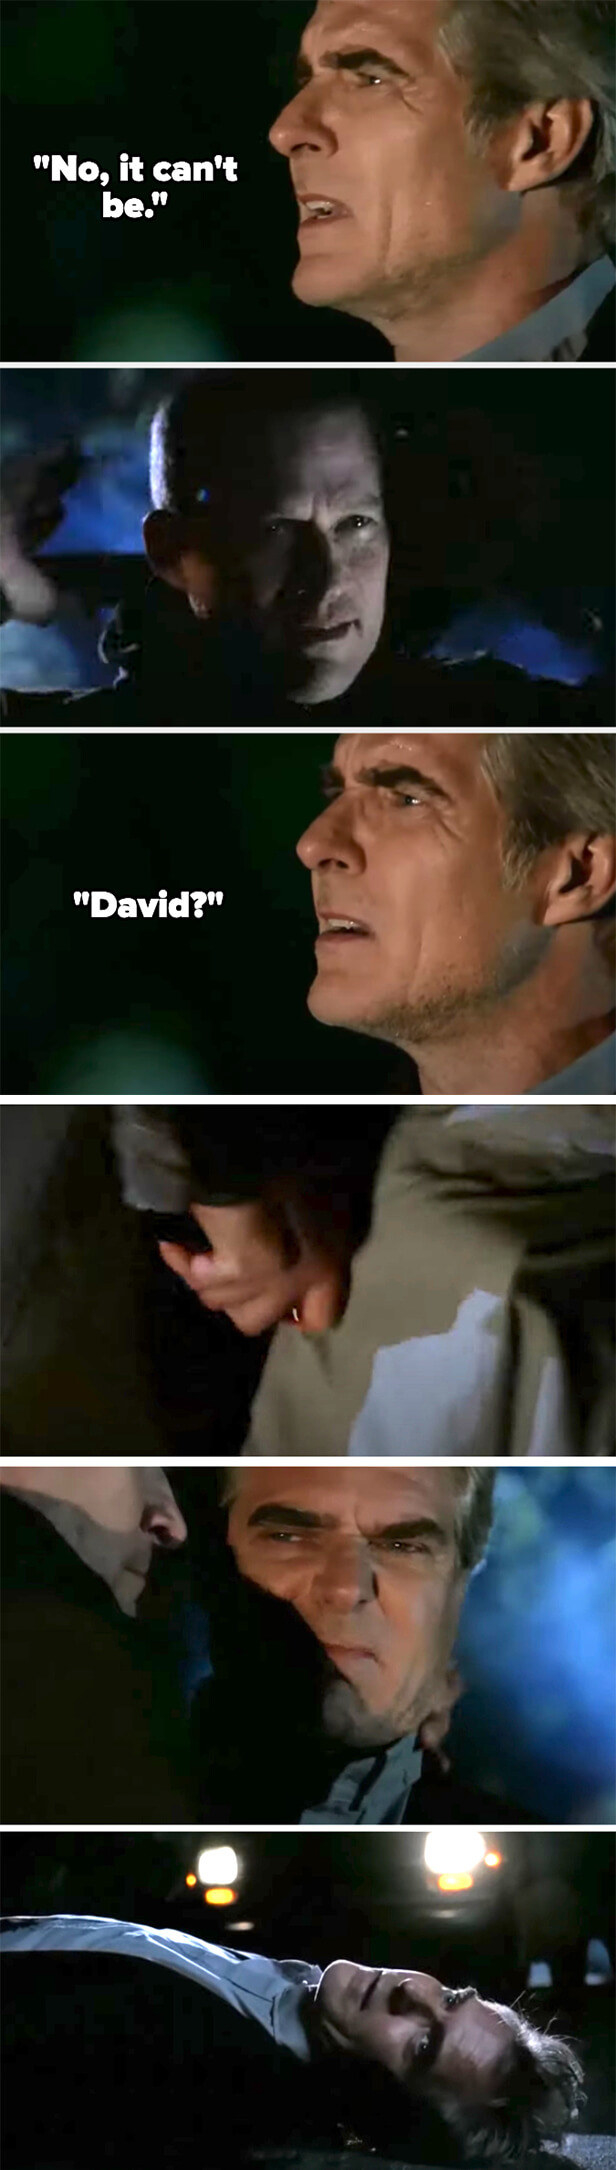 David pulls up to Conrad, who sees him and says &quot;David?&quot; David takes out a knife and stabs him and he falls, dead